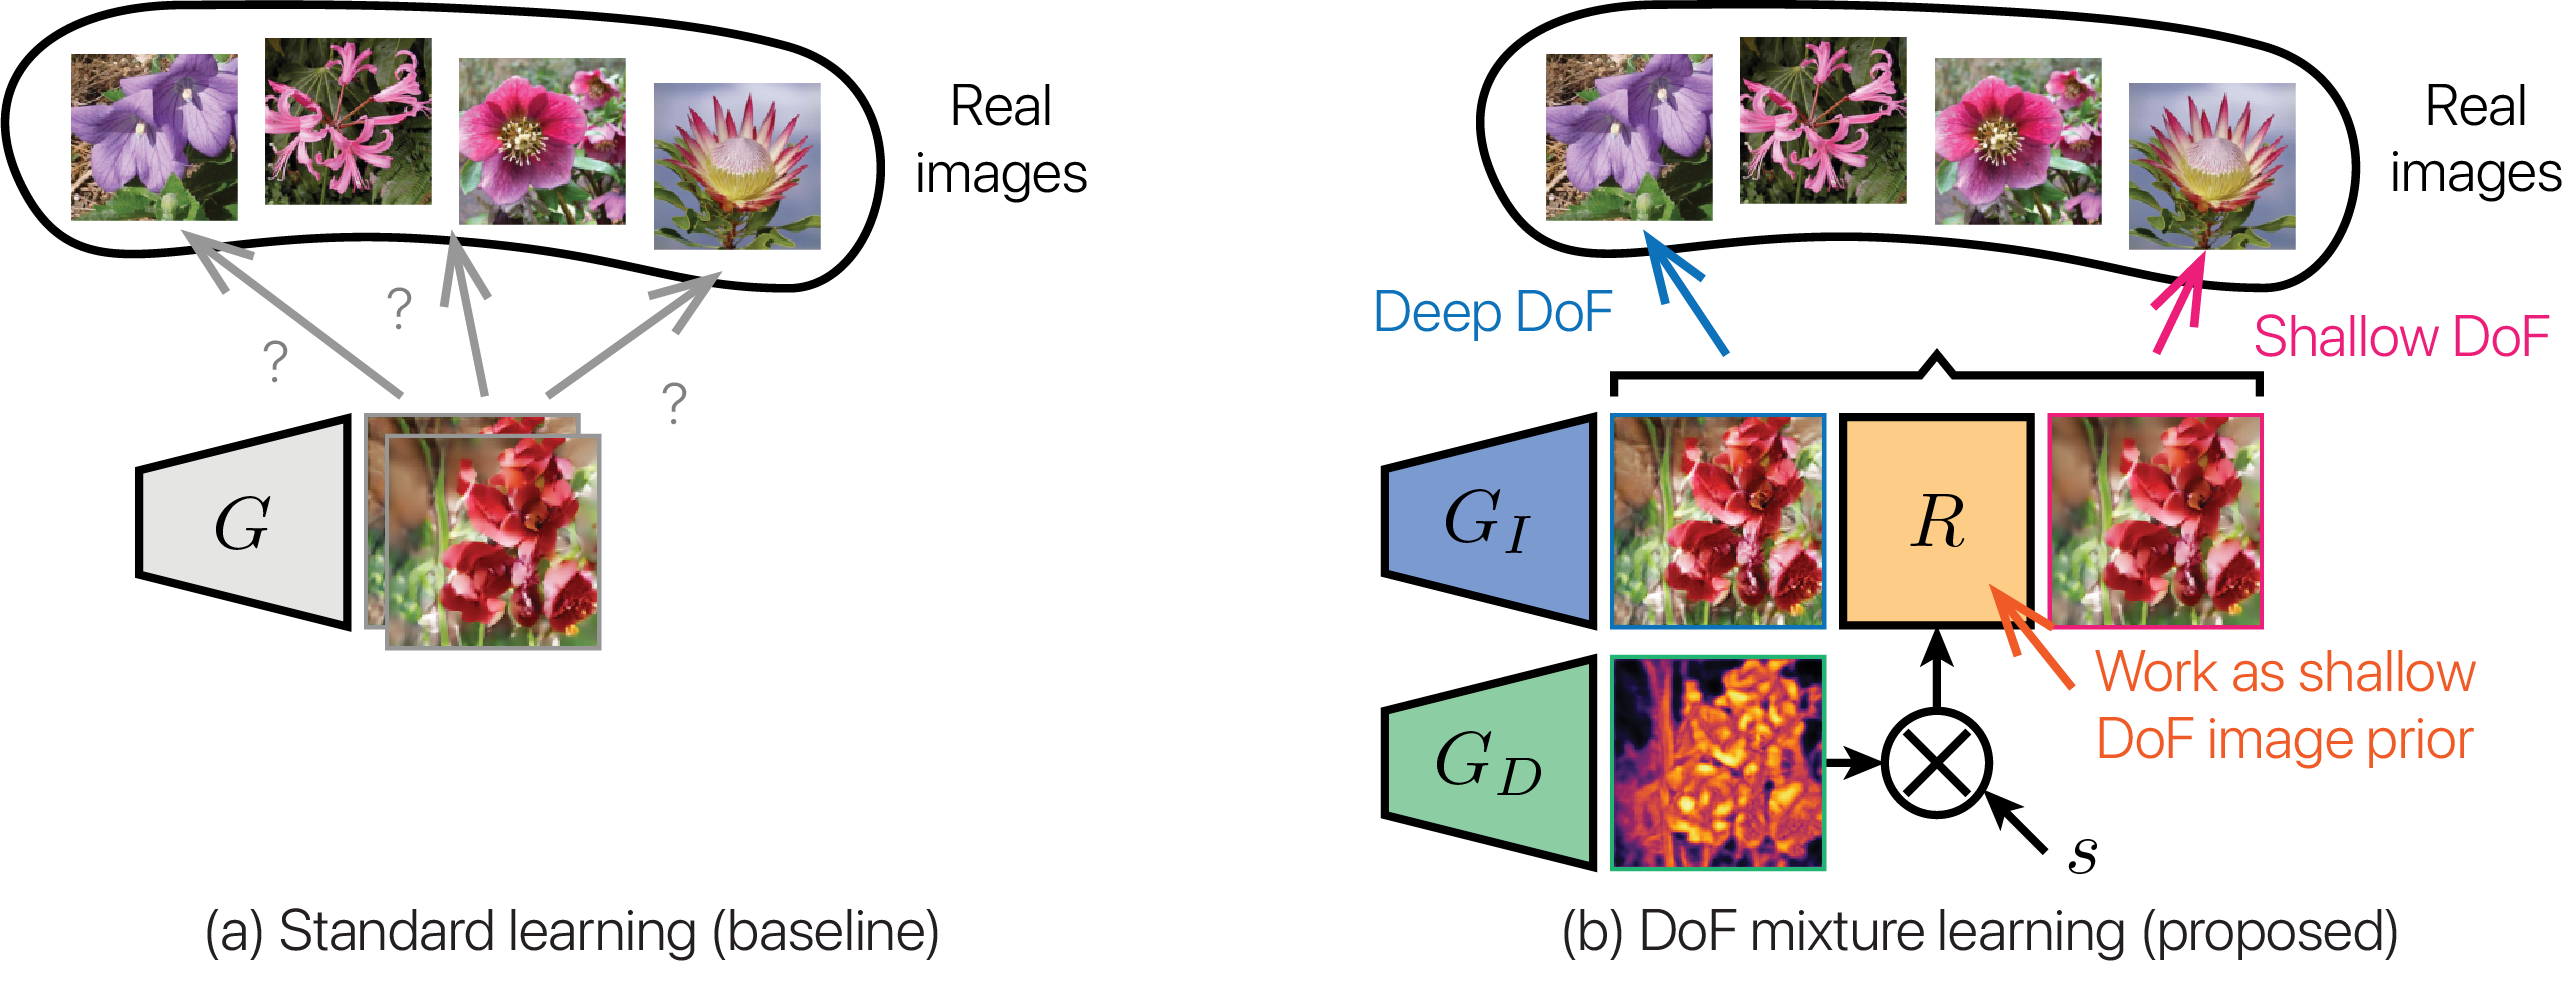 Comparison of standard and DoF mixture learning